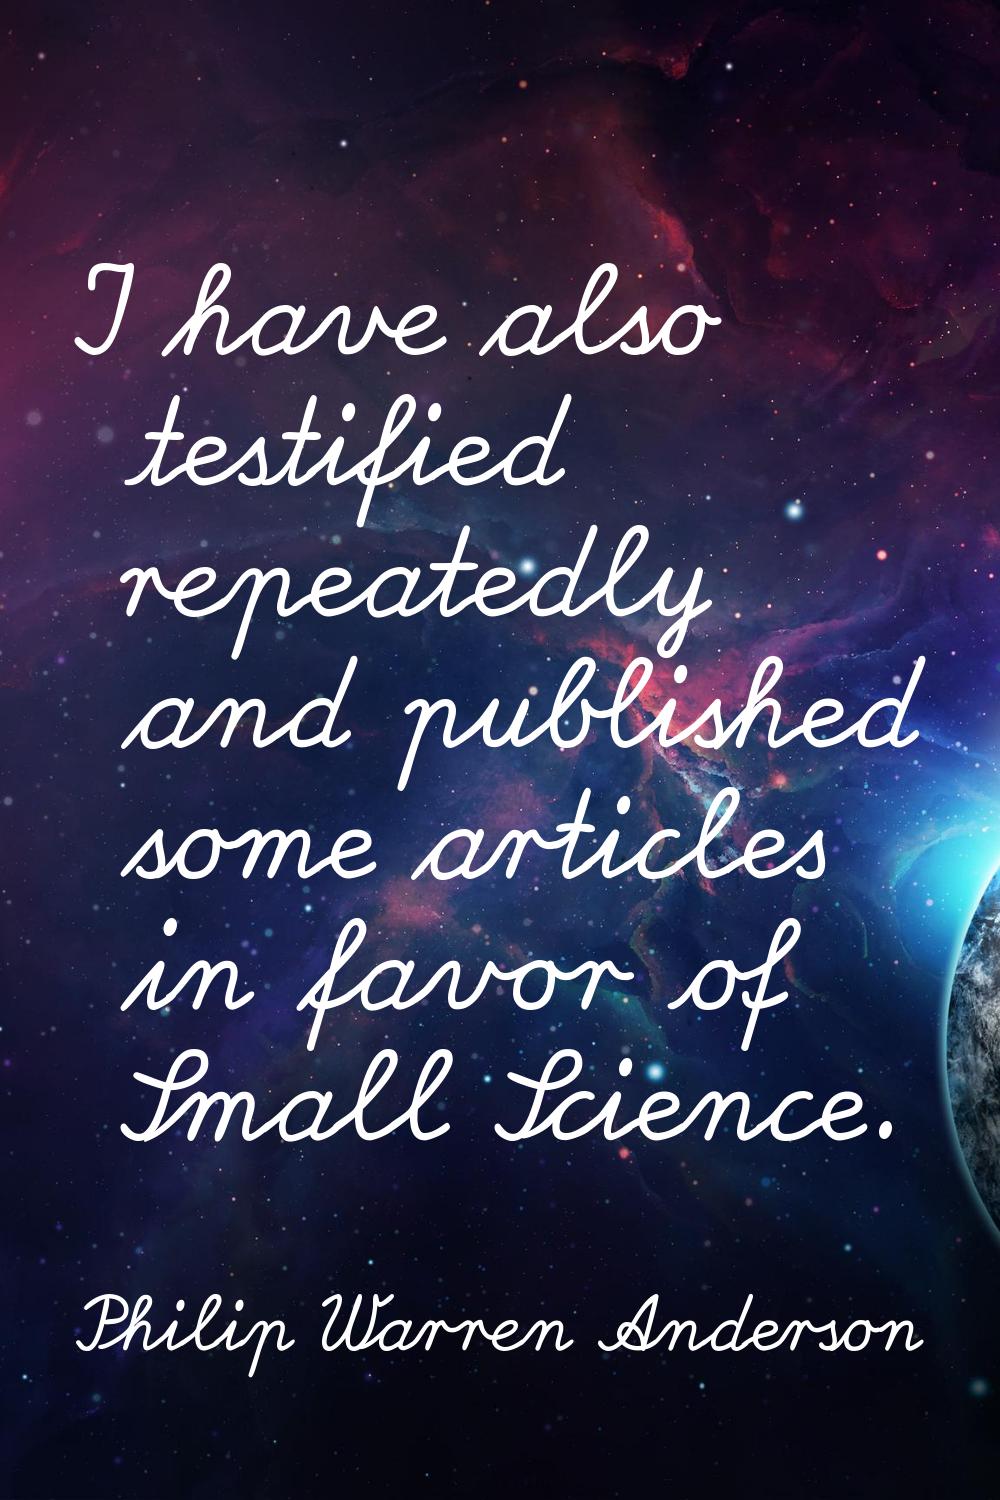 I have also testified repeatedly and published some articles in favor of Small Science.